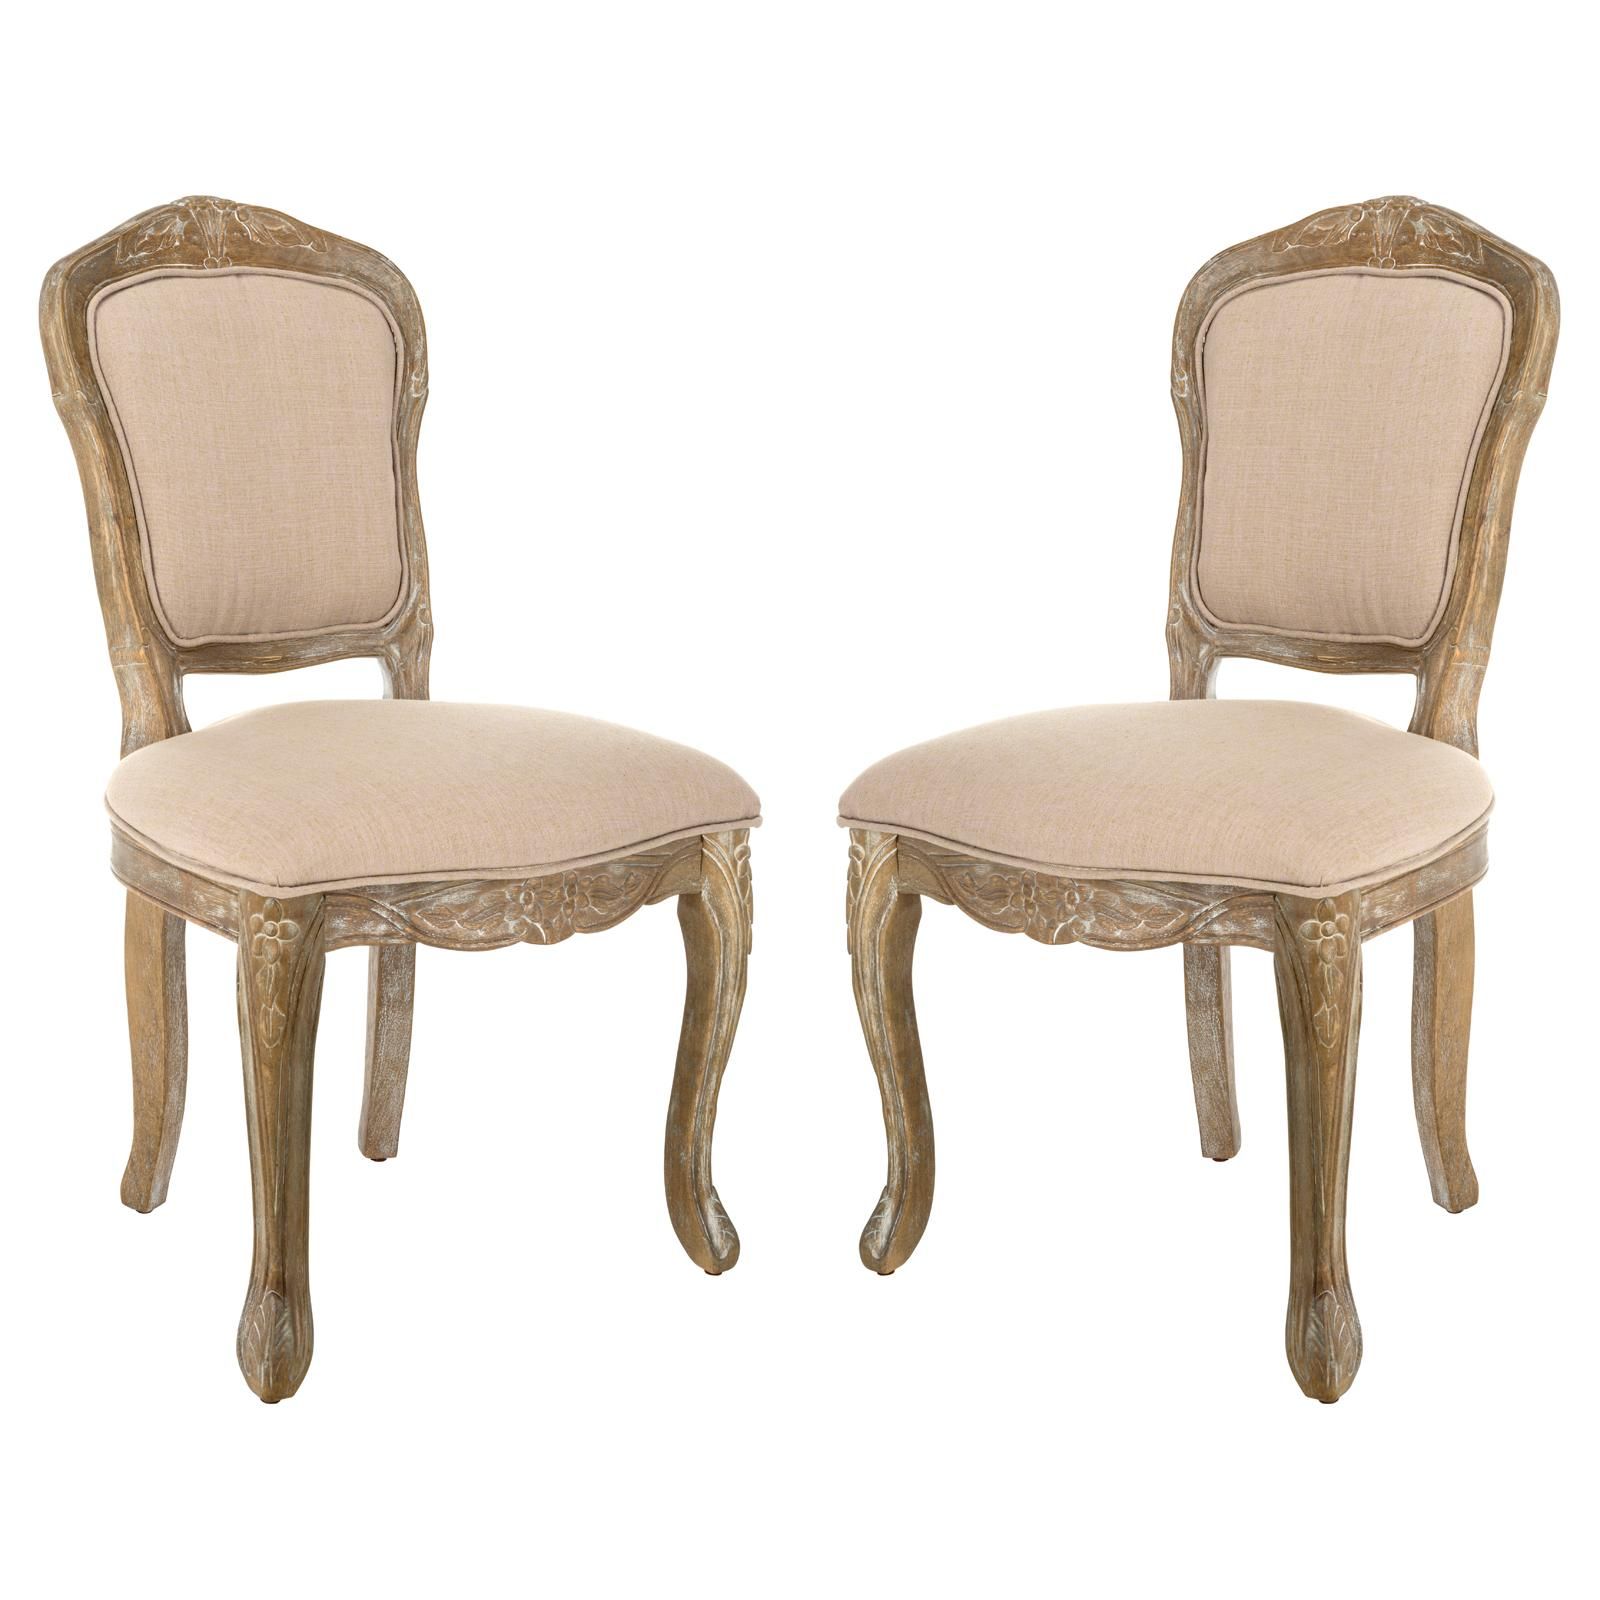 Safavieh Burgess French Upholstered Dining Side Chair | Hayneedle